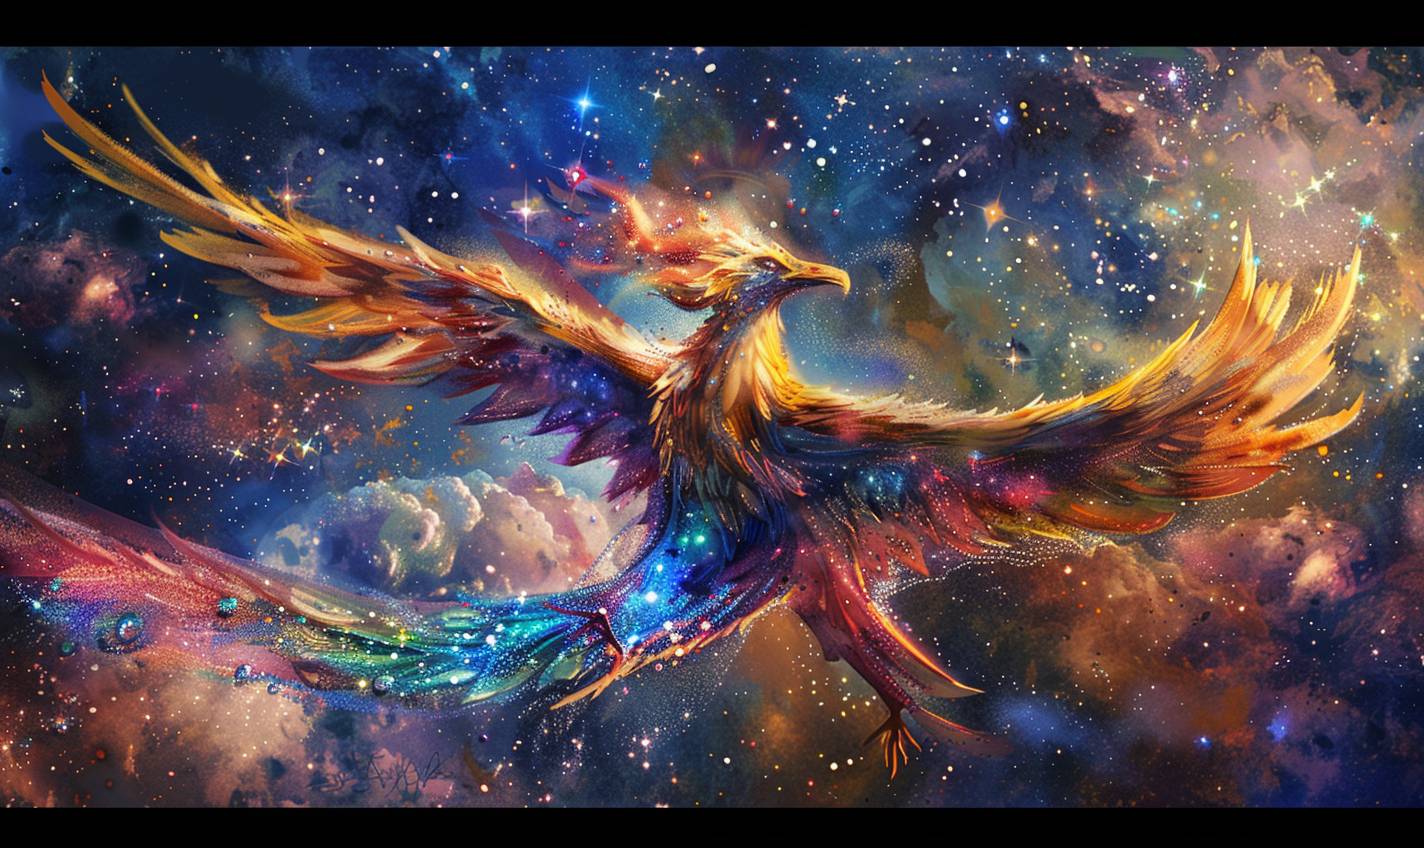 In the style of Beatrix Potter, cosmic phoenix soaring through the galaxy